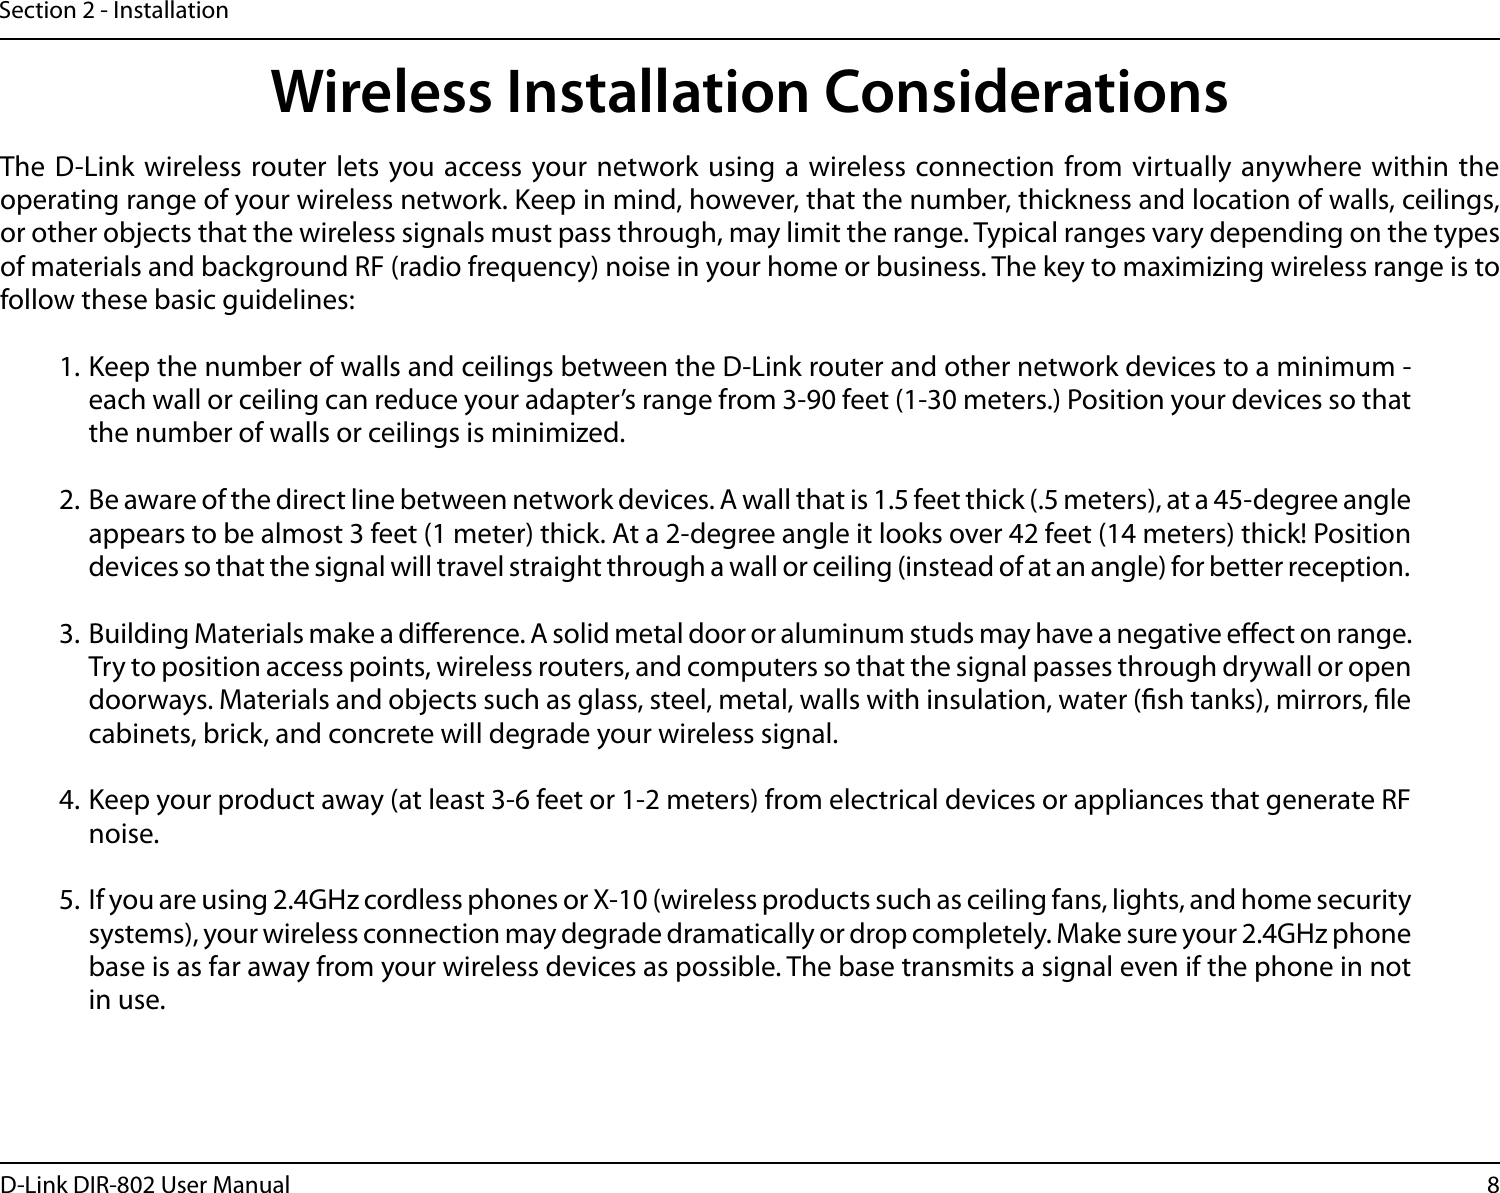 8D-Link DIR-802 User ManualSection 2 - InstallationWireless Installation ConsiderationsThe D-Link wireless router lets you access your network using a  wireless connection from virtually  anywhere within the operating range of your wireless network. Keep in mind, however, that the number, thickness and location of walls, ceilings, or other objects that the wireless signals must pass through, may limit the range. Typical ranges vary depending on the types of materials and background RF (radio frequency) noise in your home or business. The key to maximizing wireless range is to follow these basic guidelines:1. Keep the number of walls and ceilings between the D-Link router and other network devices to a minimum - each wall or ceiling can reduce your adapter’s range from 3-90 feet (1-30 meters.) Position your devices so that the number of walls or ceilings is minimized.2. Be aware of the direct line between network devices. A wall that is 1.5 feet thick (.5 meters), at a 45-degree angle appears to be almost 3 feet (1 meter) thick. At a 2-degree angle it looks over 42 feet (14 meters) thick! Position devices so that the signal will travel straight through a wall or ceiling (instead of at an angle) for better reception.3. Building Materials make a dierence. A solid metal door or aluminum studs may have a negative eect on range. Try to position access points, wireless routers, and computers so that the signal passes through drywall or open doorways. Materials and objects such as glass, steel, metal, walls with insulation, water (sh tanks), mirrors, le cabinets, brick, and concrete will degrade your wireless signal.4. Keep your product away (at least 3-6 feet or 1-2 meters) from electrical devices or appliances that generate RF noise.5. If you are using 2.4GHz cordless phones or X-10 (wireless products such as ceiling fans, lights, and home security systems), your wireless connection may degrade dramatically or drop completely. Make sure your 2.4GHz phone base is as far away from your wireless devices as possible. The base transmits a signal even if the phone in not in use.